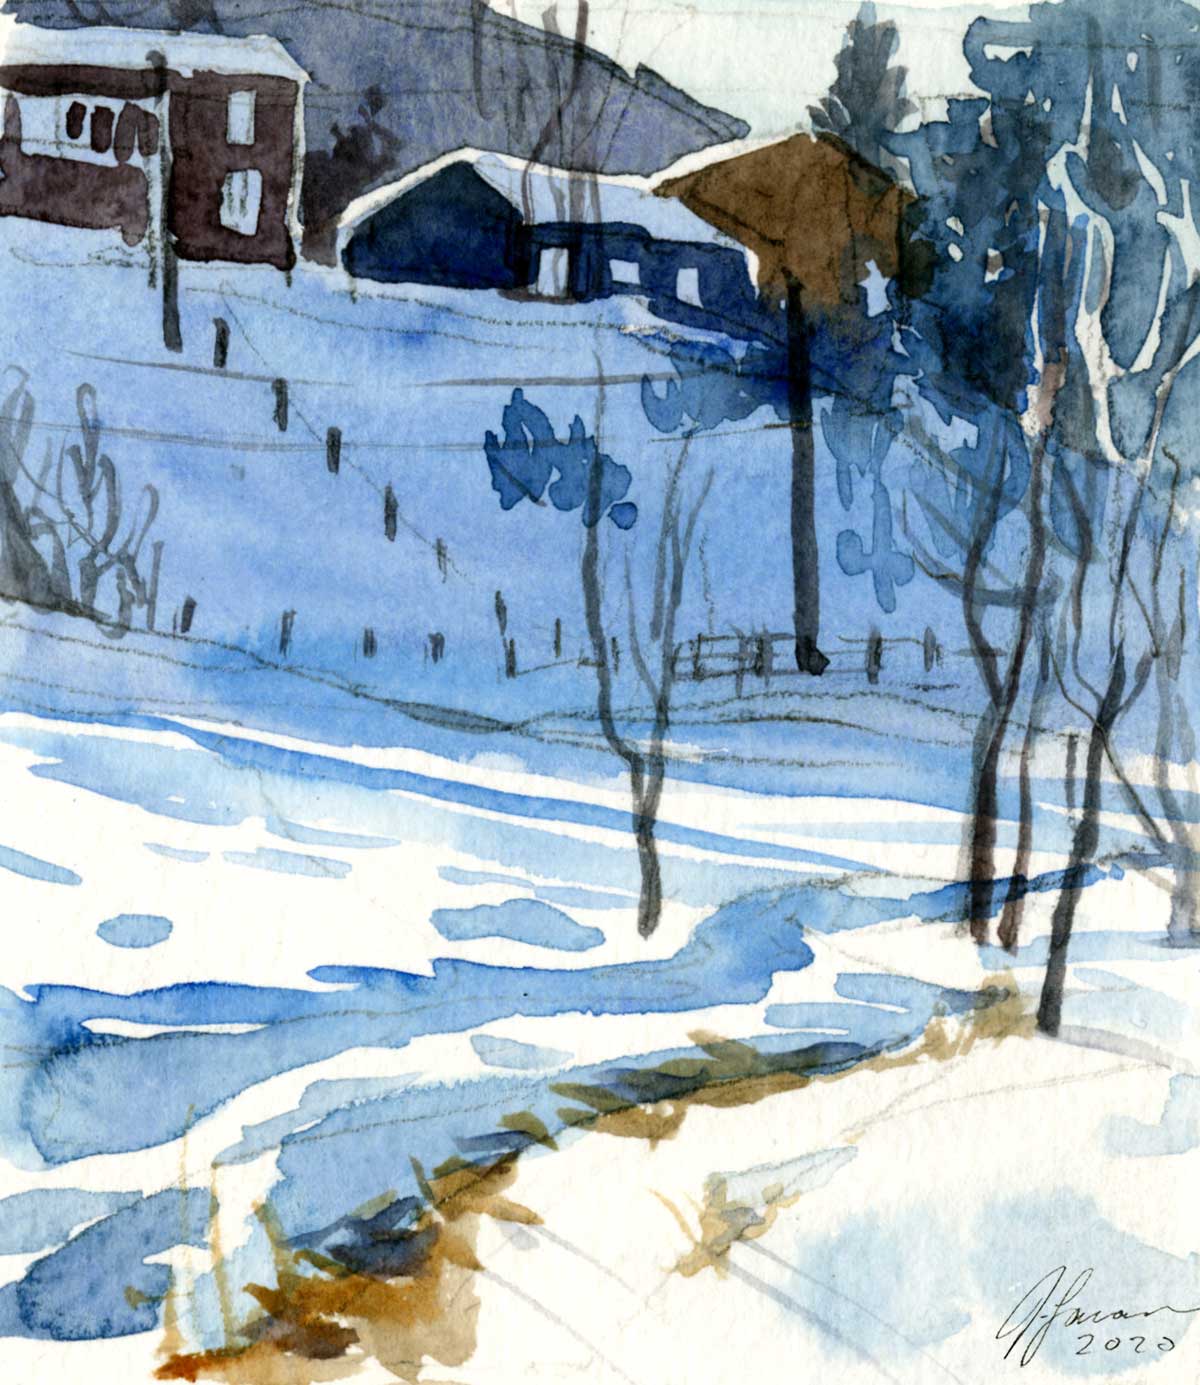 Watercolor sketch of houses on a ridge line with a snowy field below streaked with blue shadows